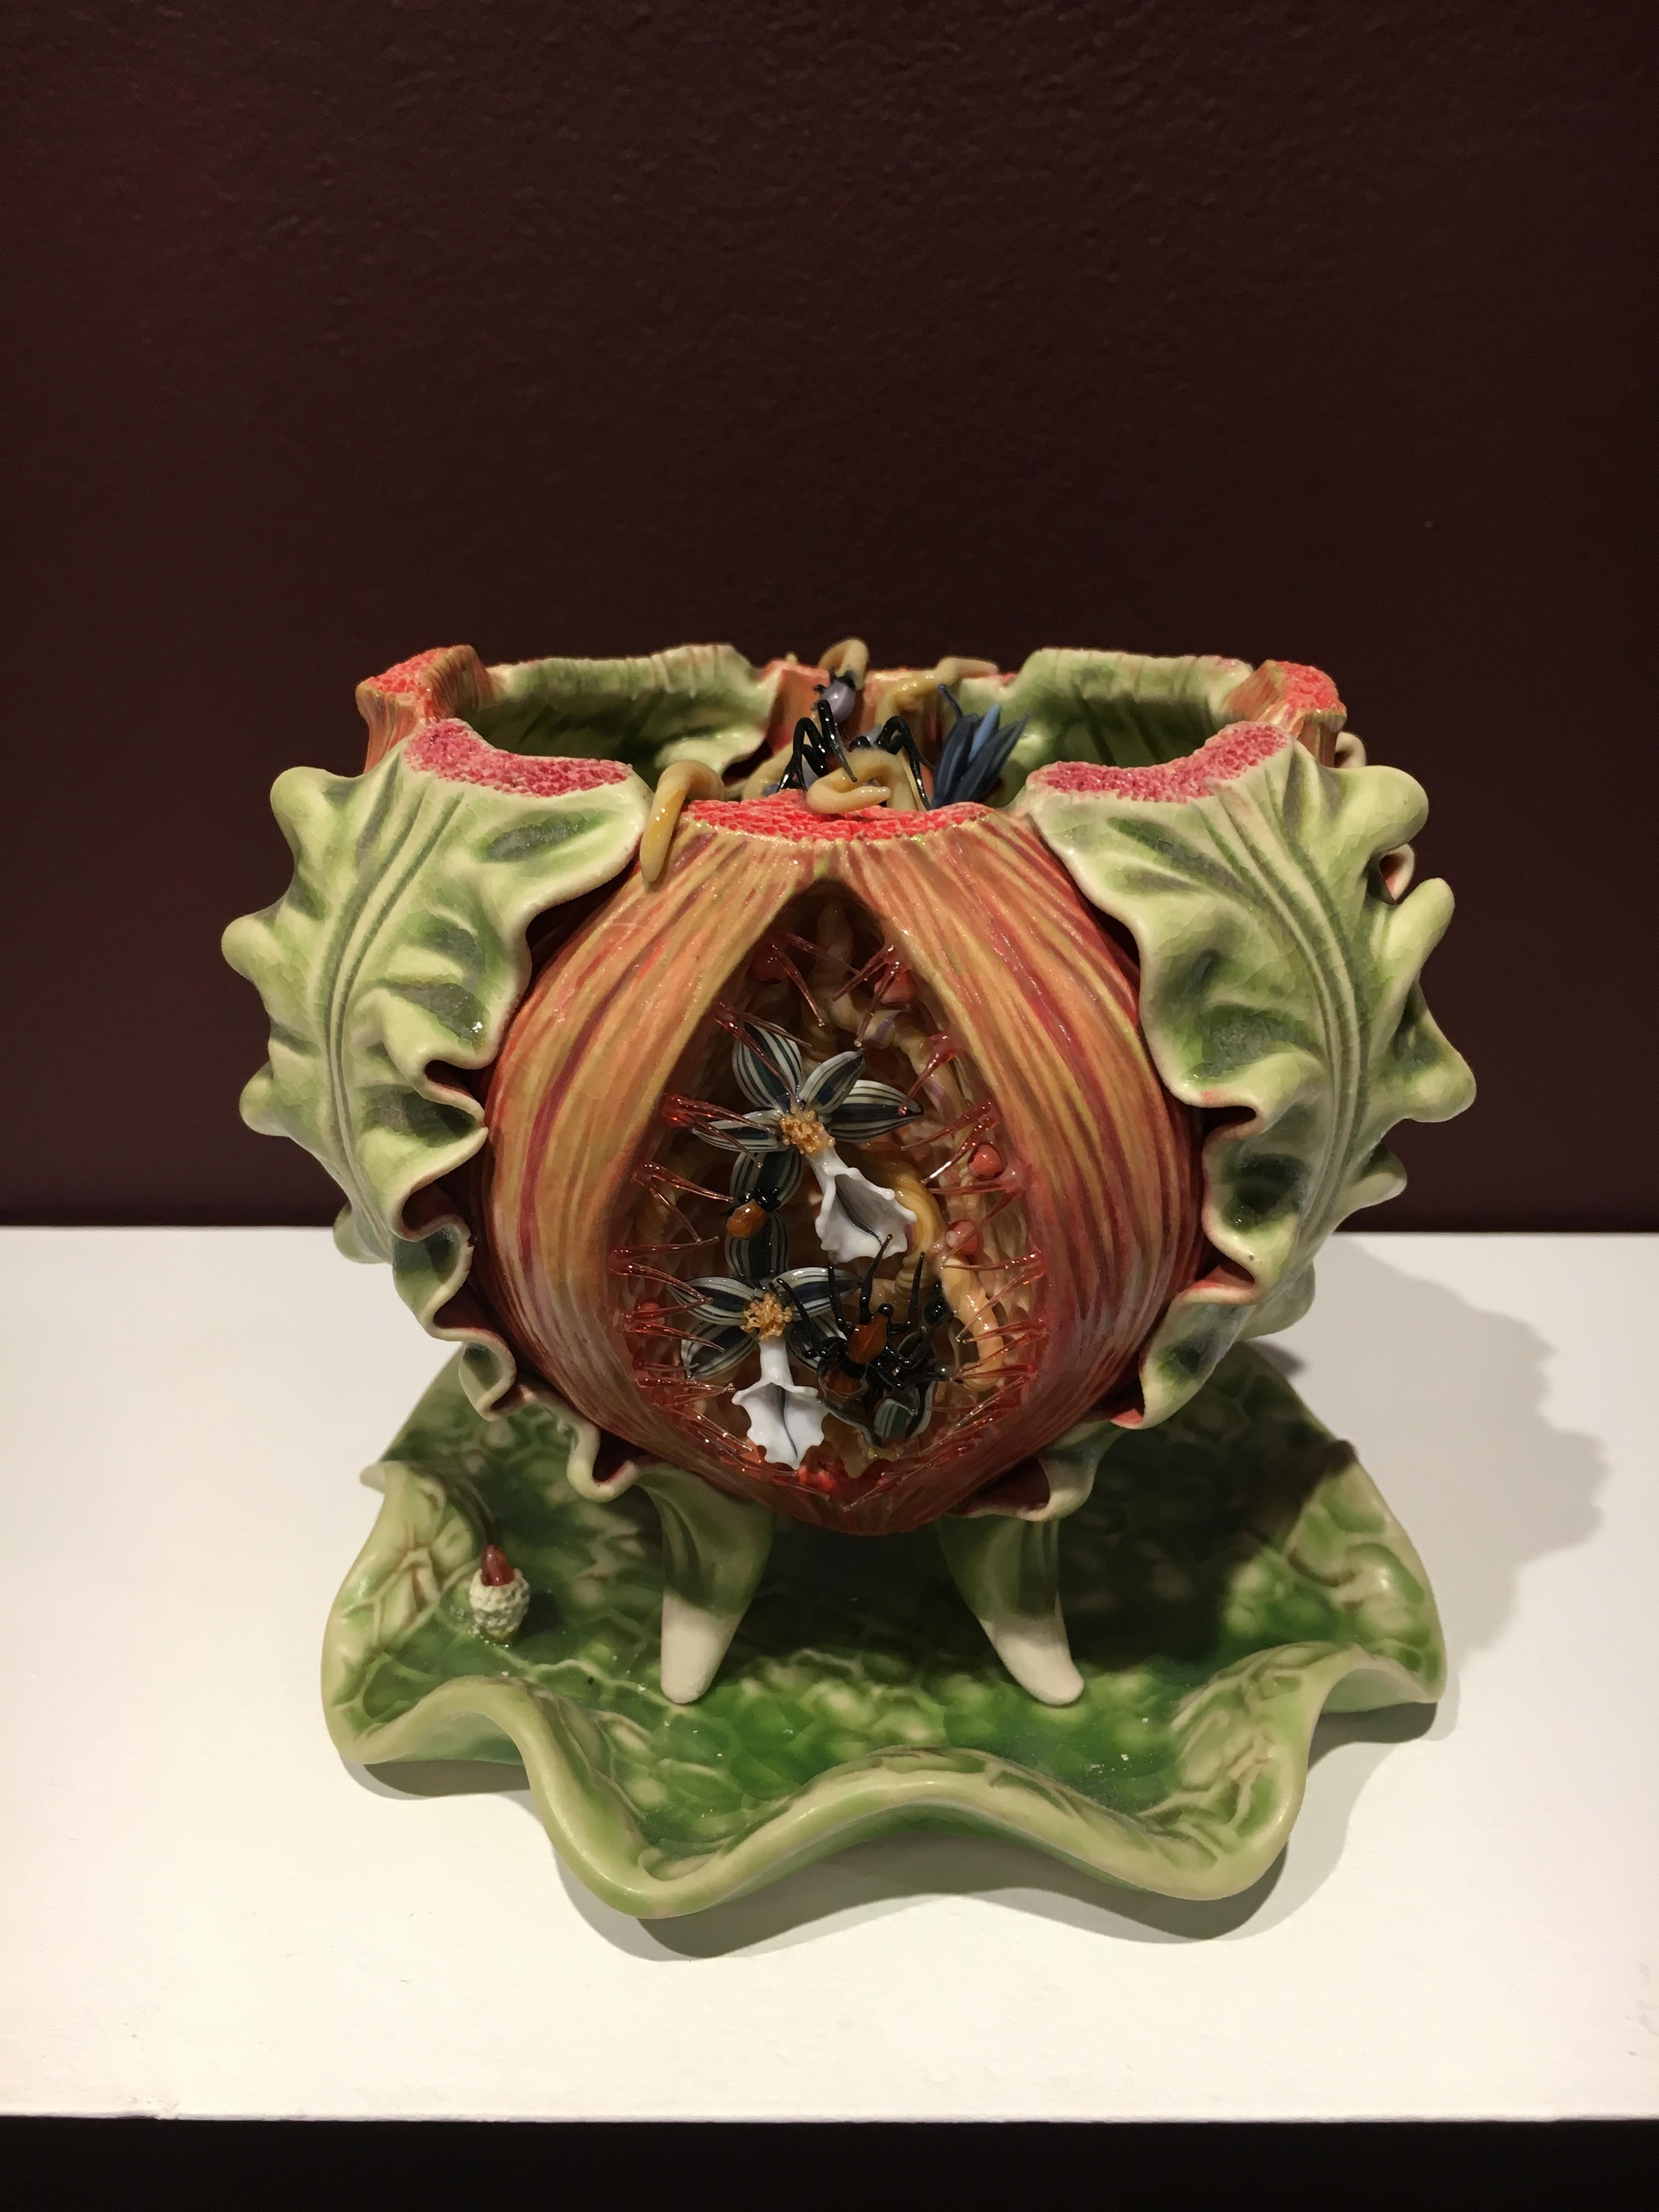 Bonnie Seeman grew up in Miami, Florida with a propensity towards anatomy illustration and the dazzling colors and rich foliage of the Miami landscape.  Developing her technique with porcelain and glass, Seeman channeled her inspirations; resulting